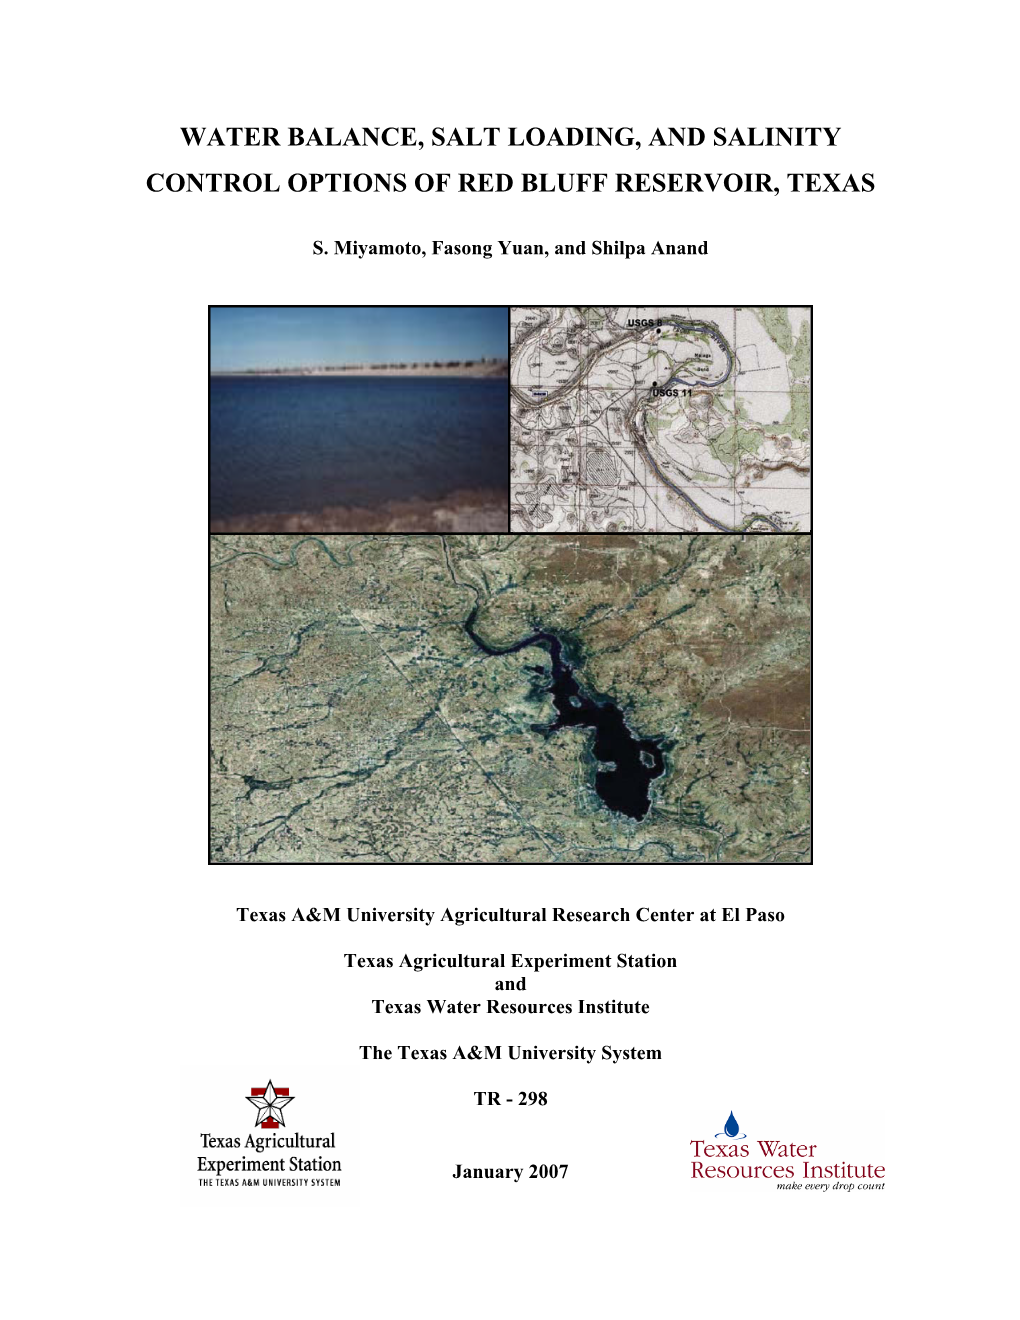 Water Balance, Salt Loading, and Salinity Control Options of Red Bluff Reservoir, Texas